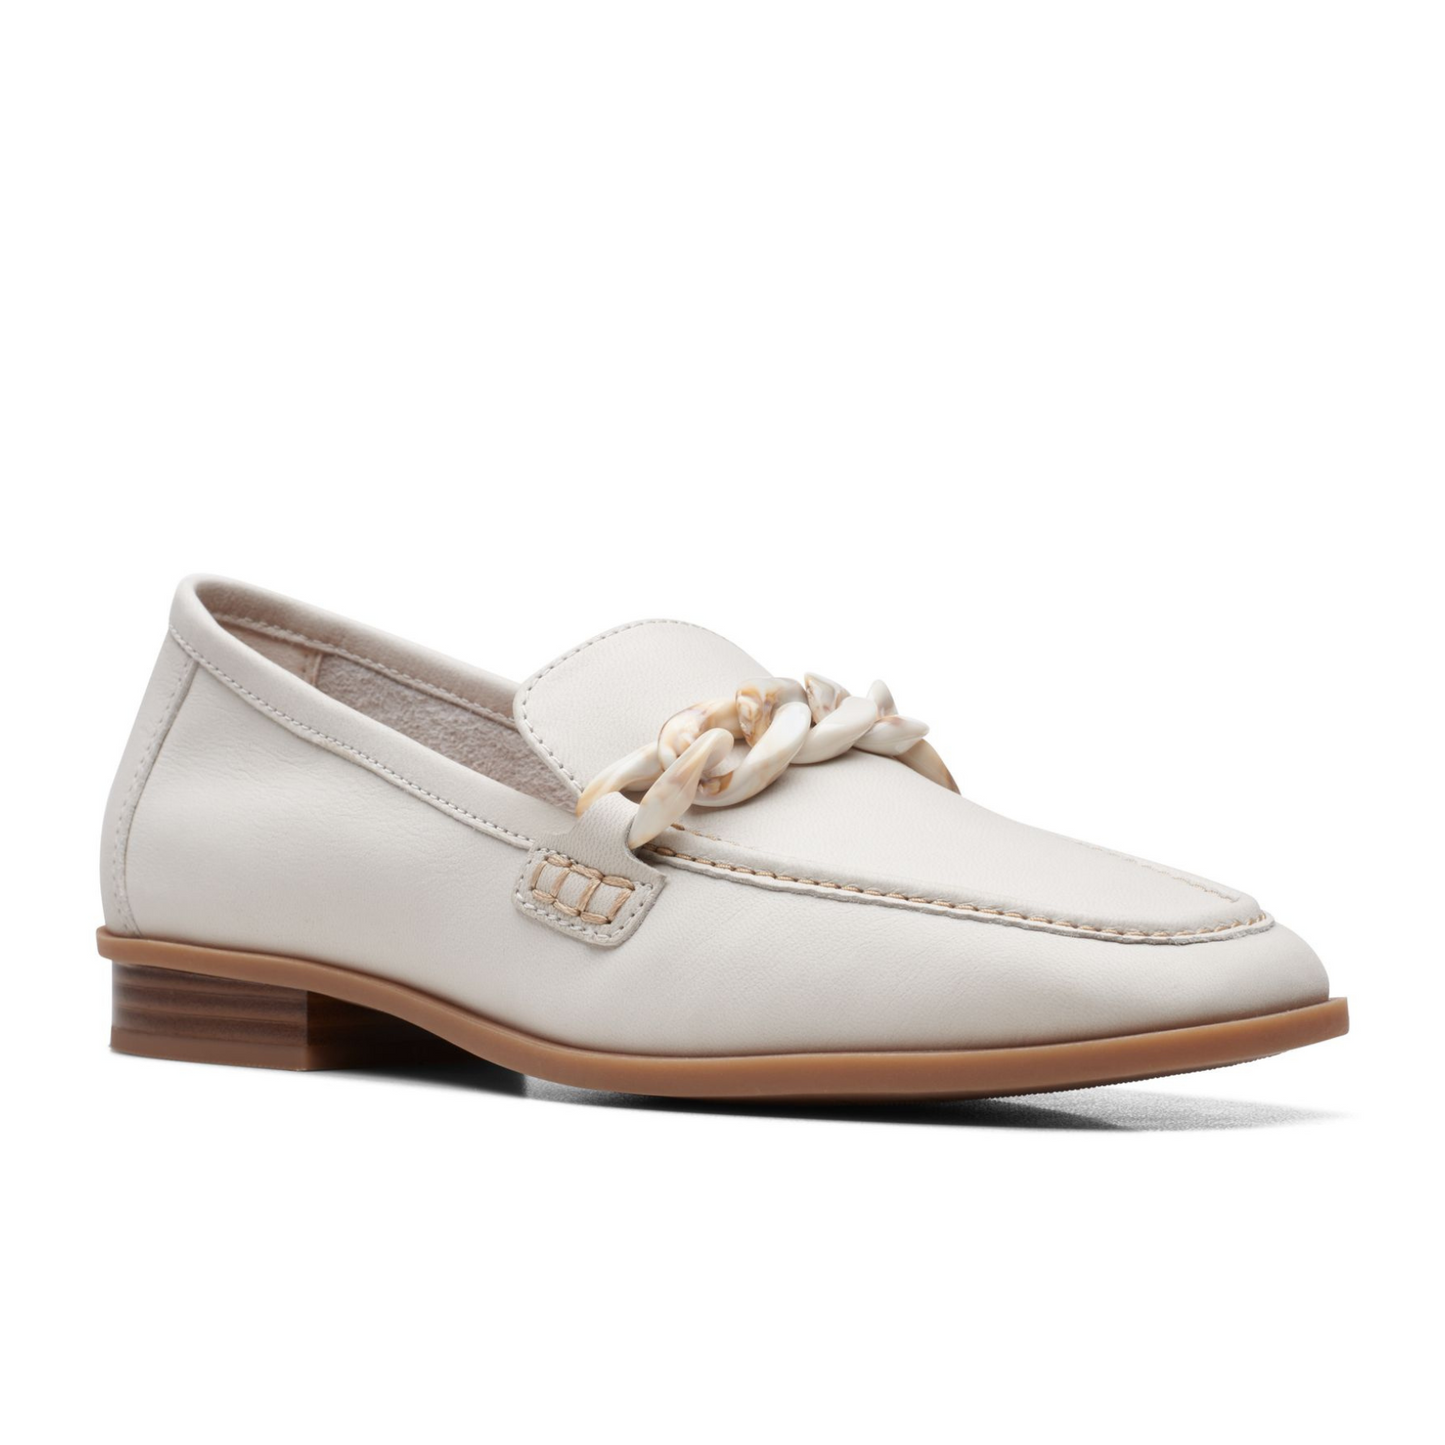 Clarks Sarafyna Iris Loafer - White Leather